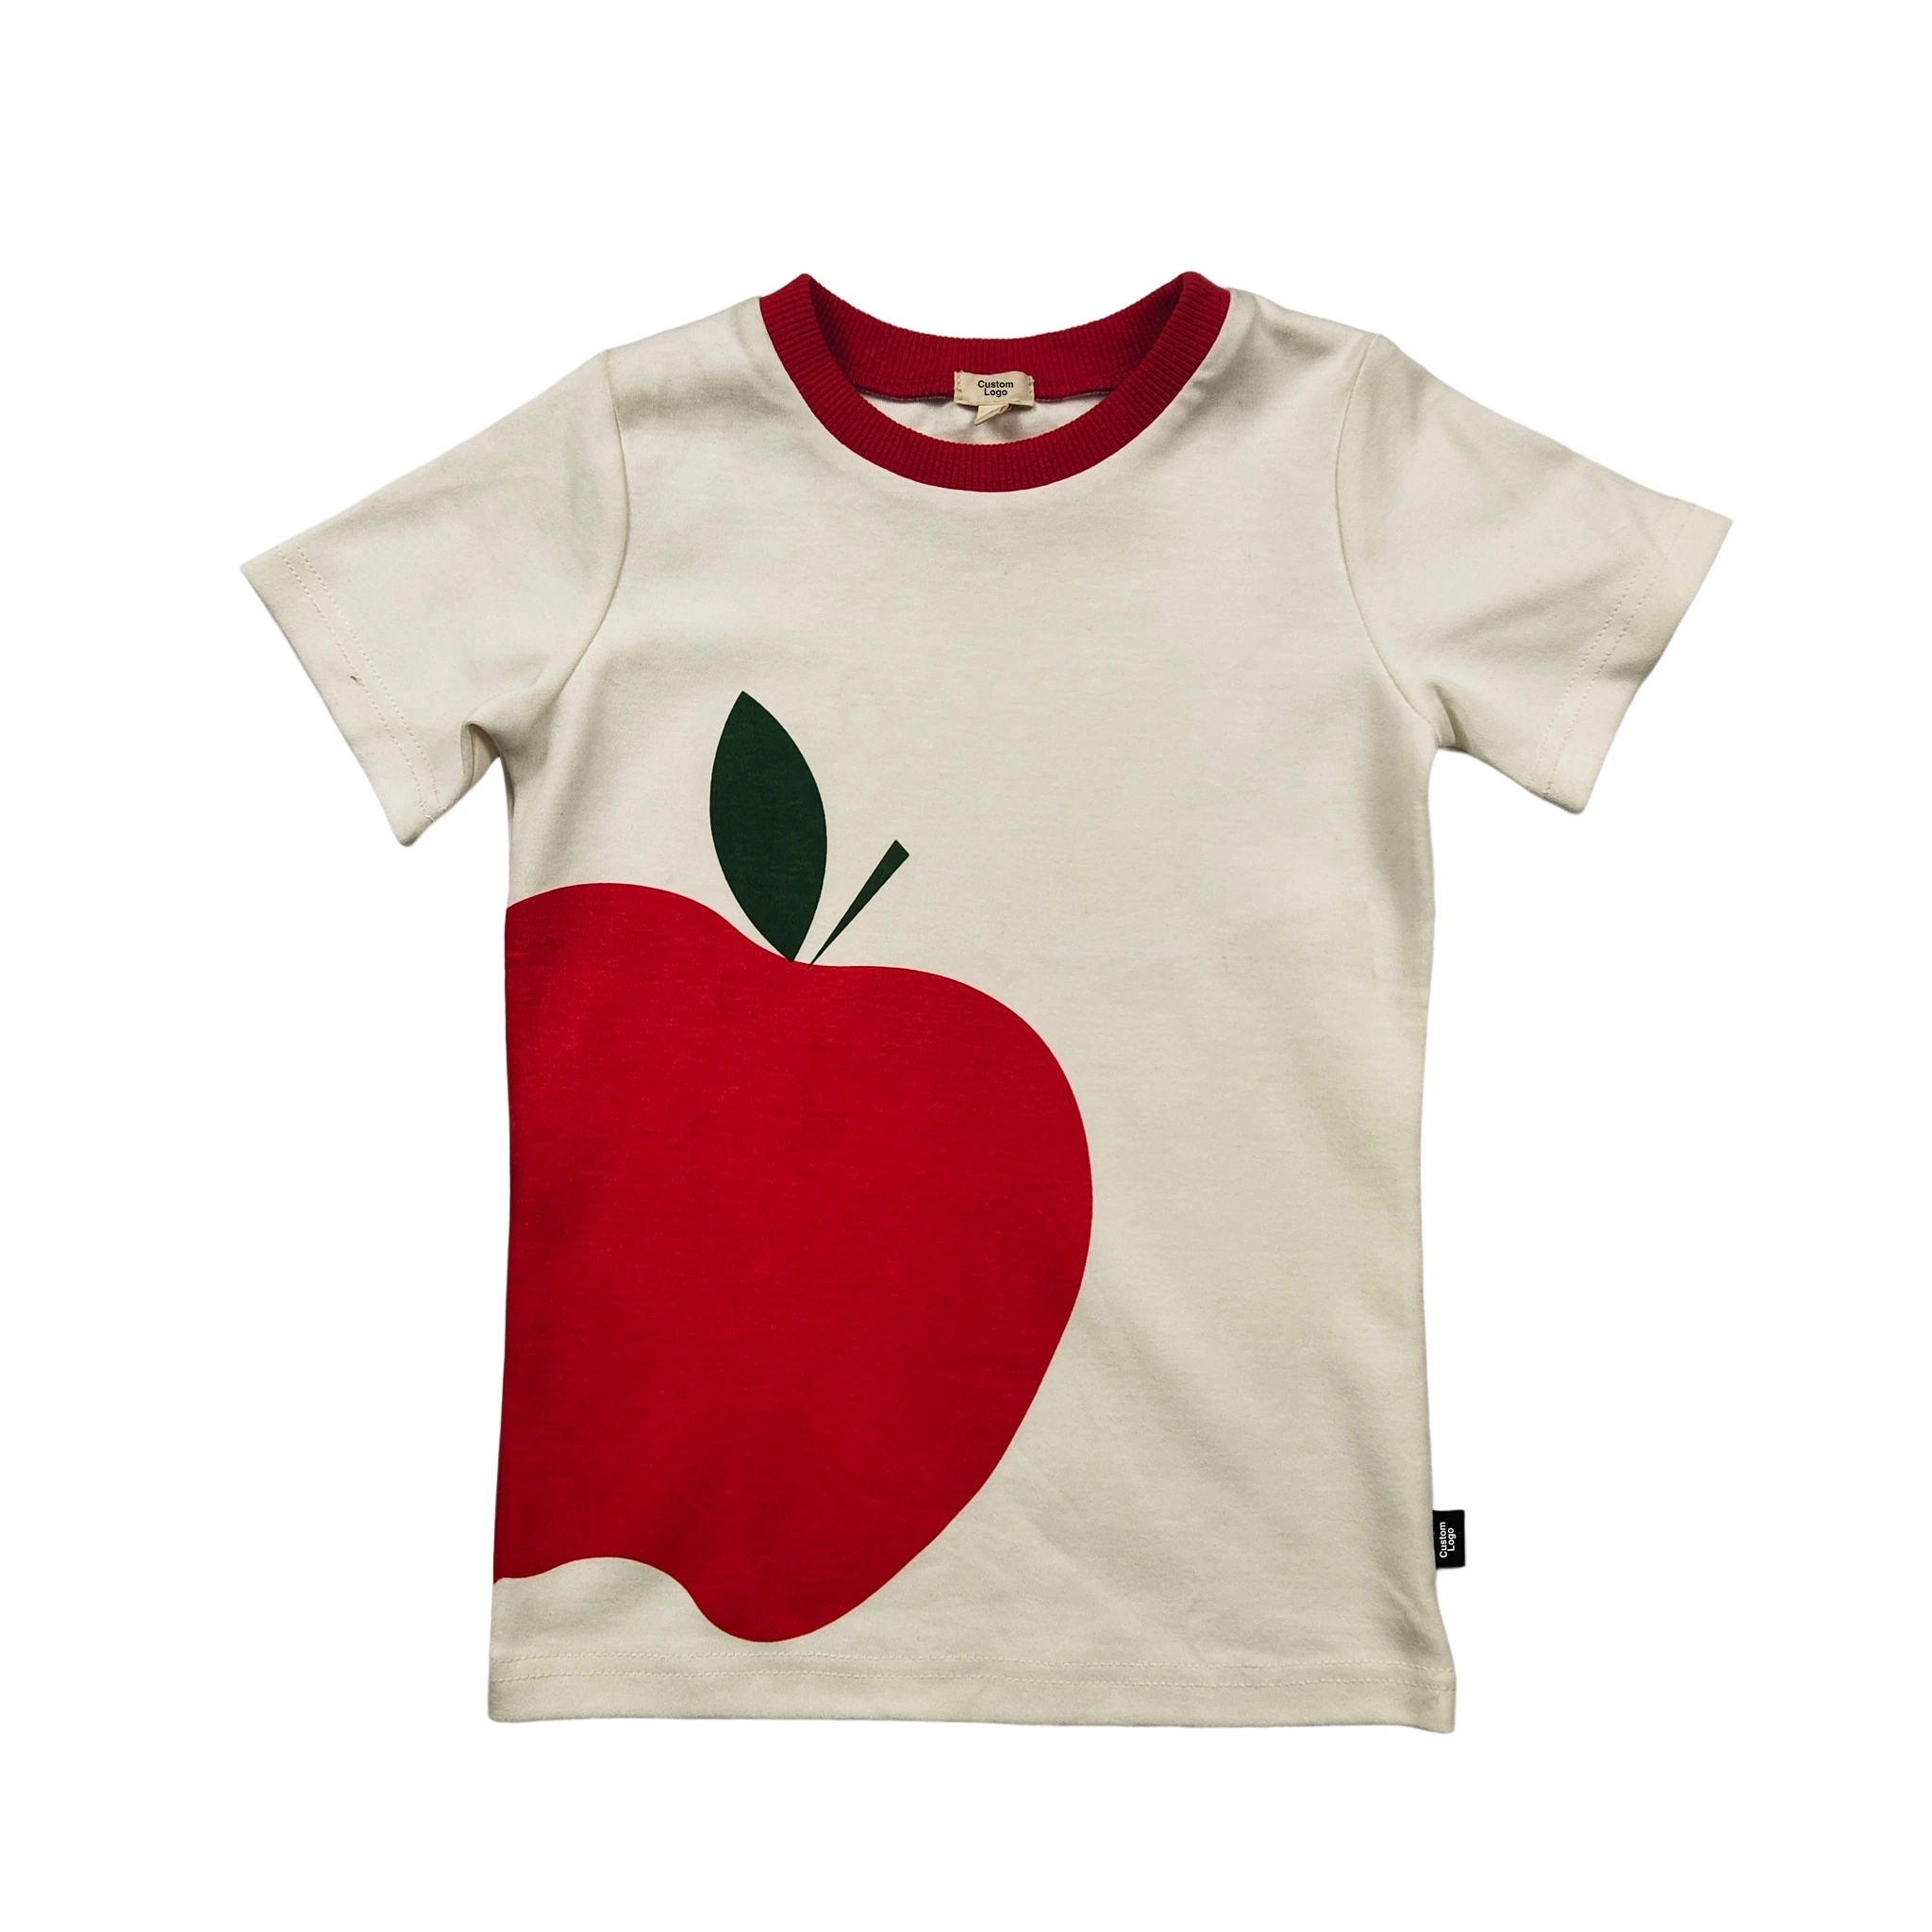 High quality/High cost performance  Kids / Babies Custom Brand Fashion Design 100% Cotton T-Shirt Crewneck Blank Apparel Clothes Logo Print Embroidery Wholesale/Supplier Low Price